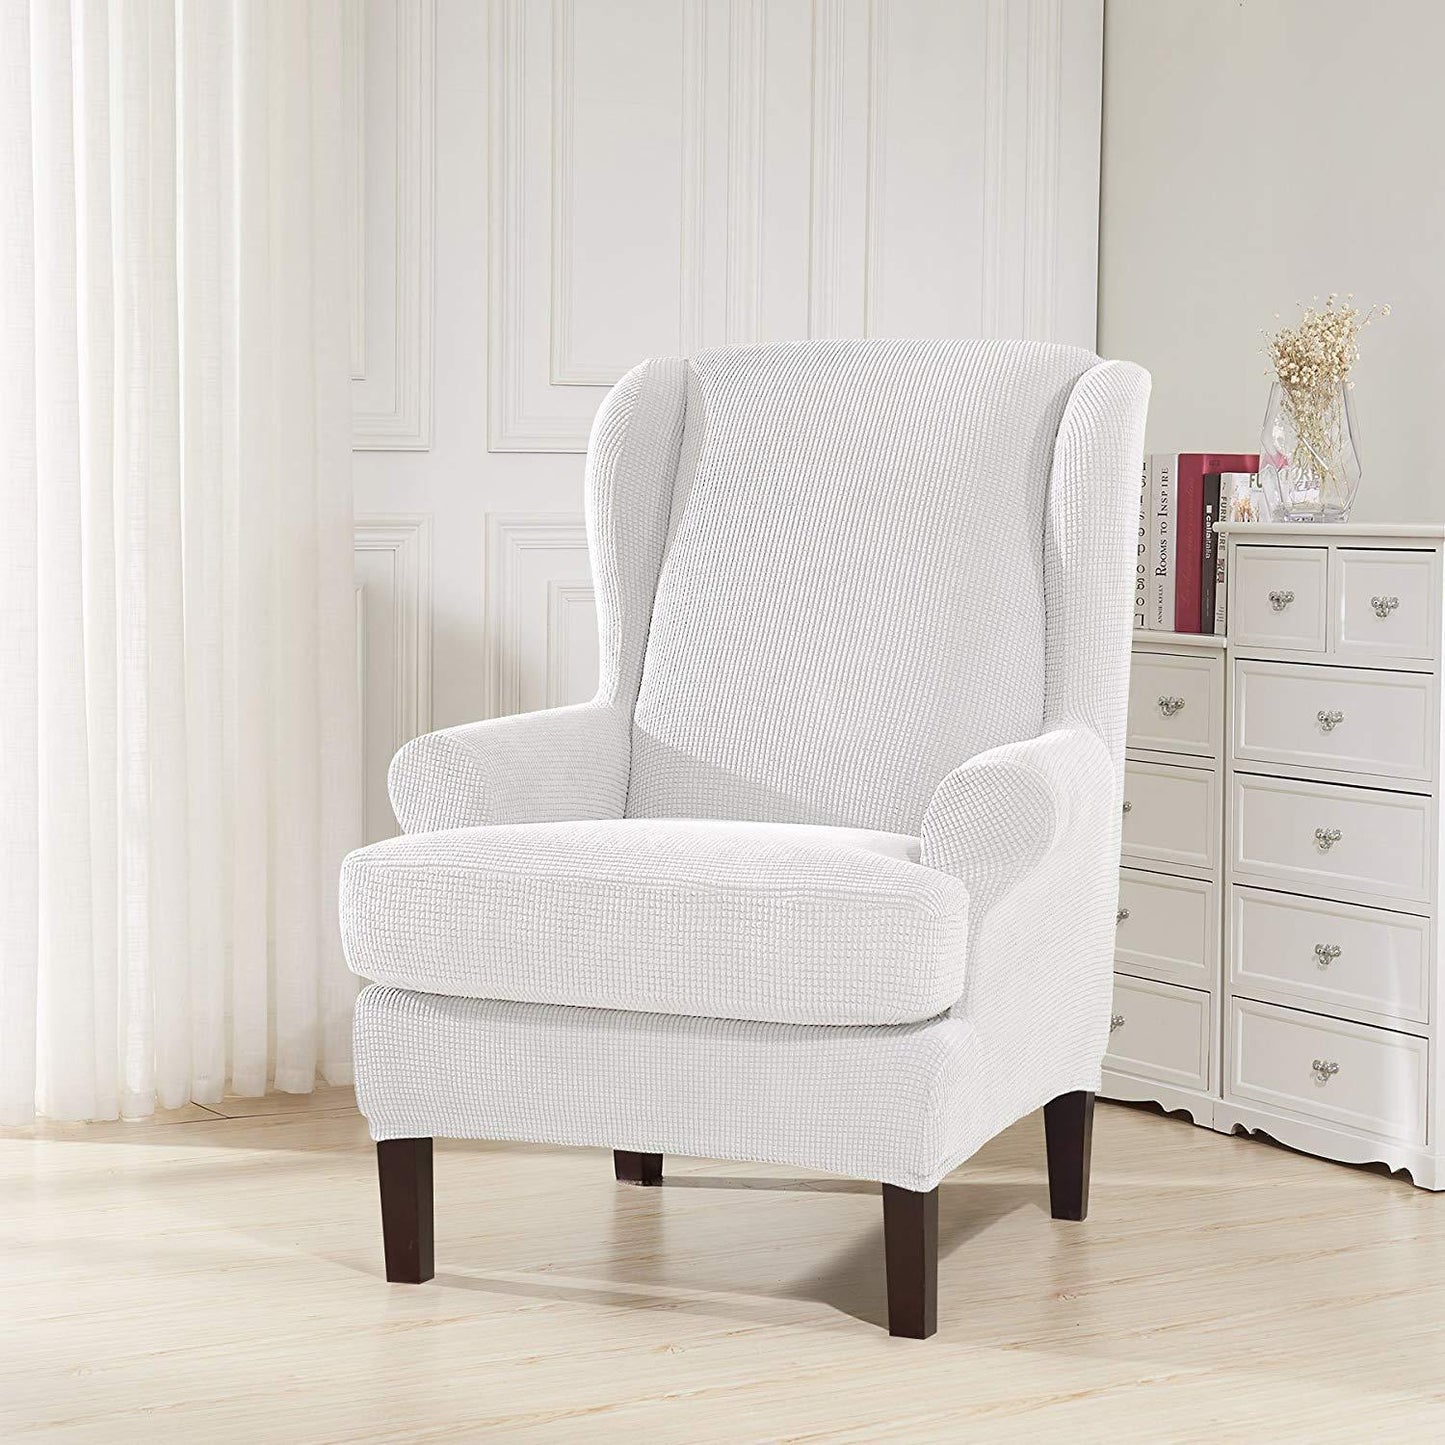 Stretchable Recliner Cover - Pretty Little Wish.com